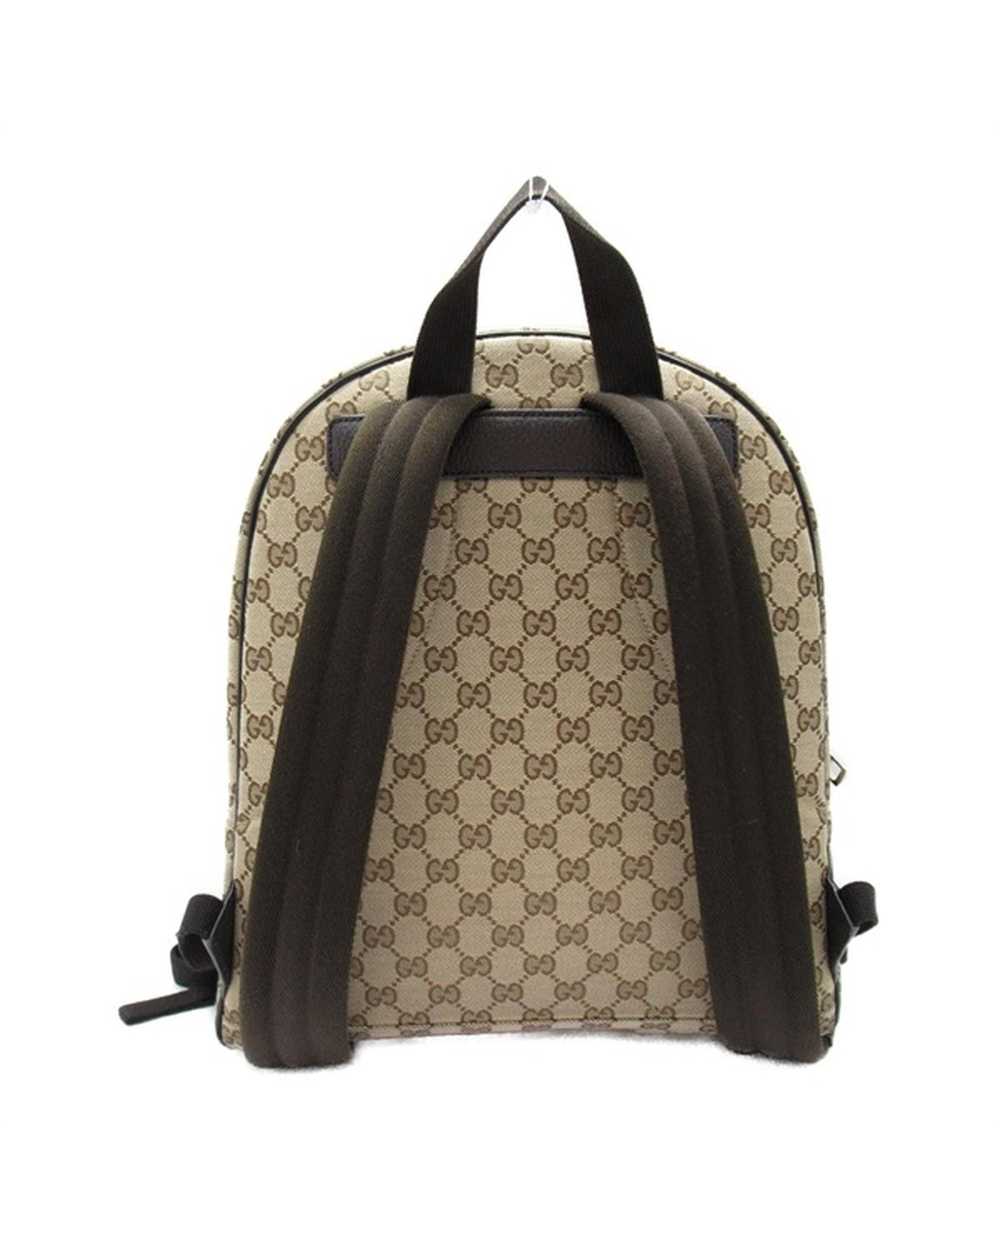 Gucci Canvas Backpack in Brown with GG Pattern - … - image 2